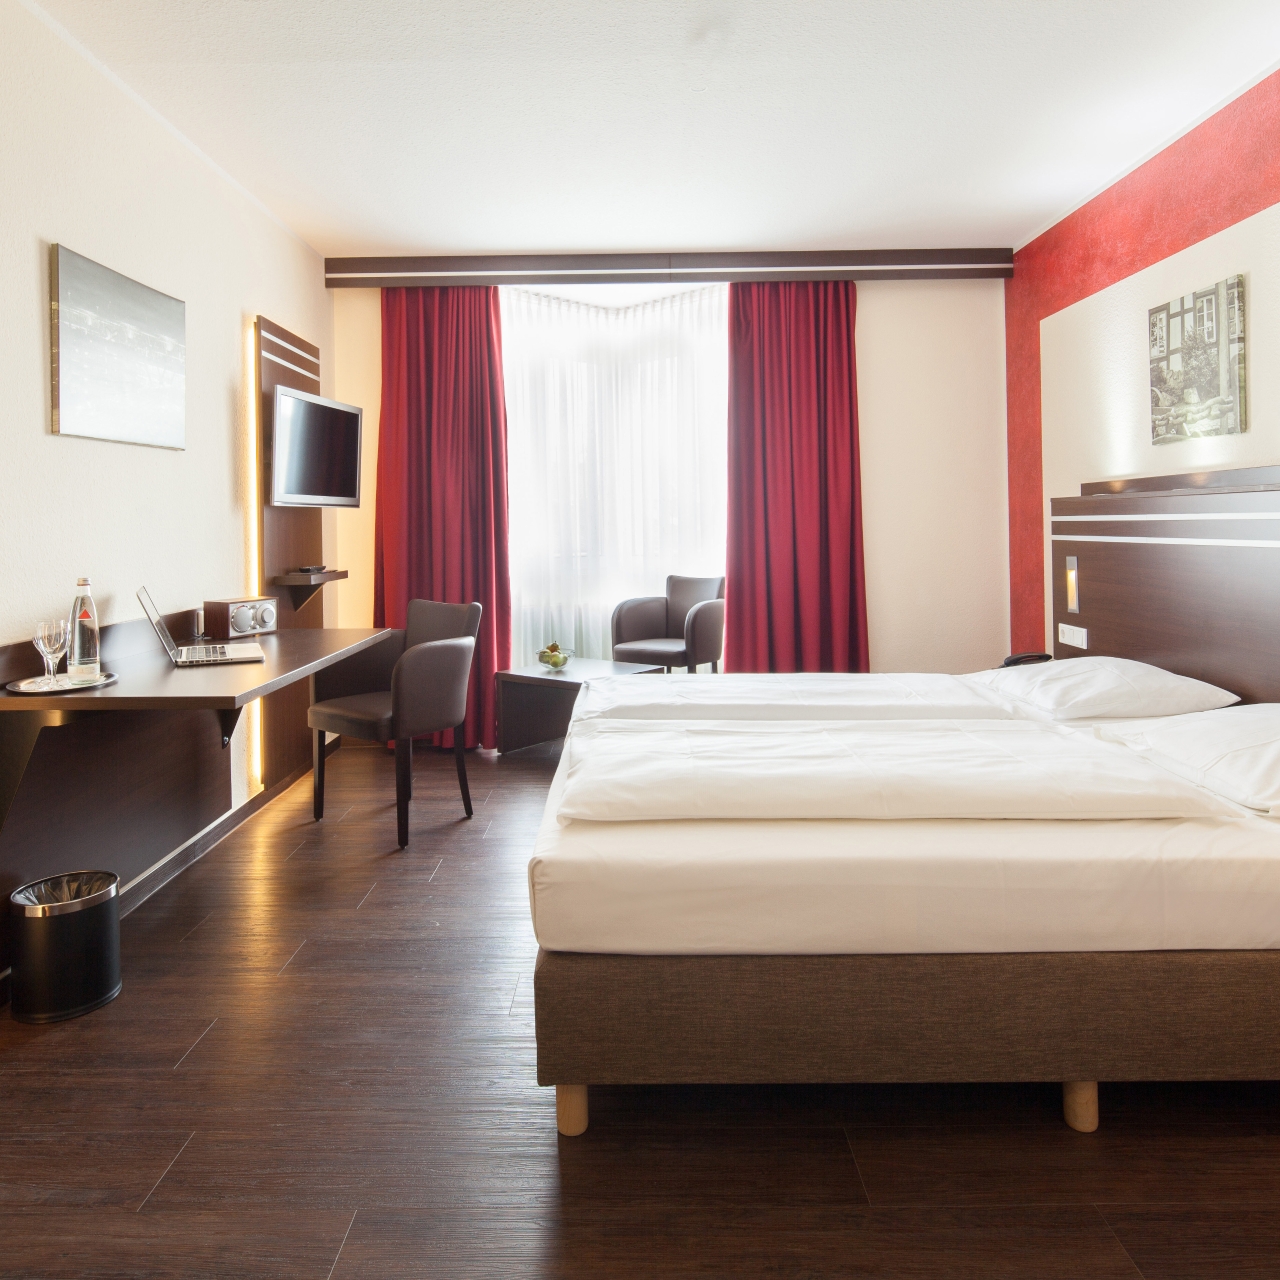 Hotel Am Stern Bruhl North Rhine Westphalia At Hrs With Free Services